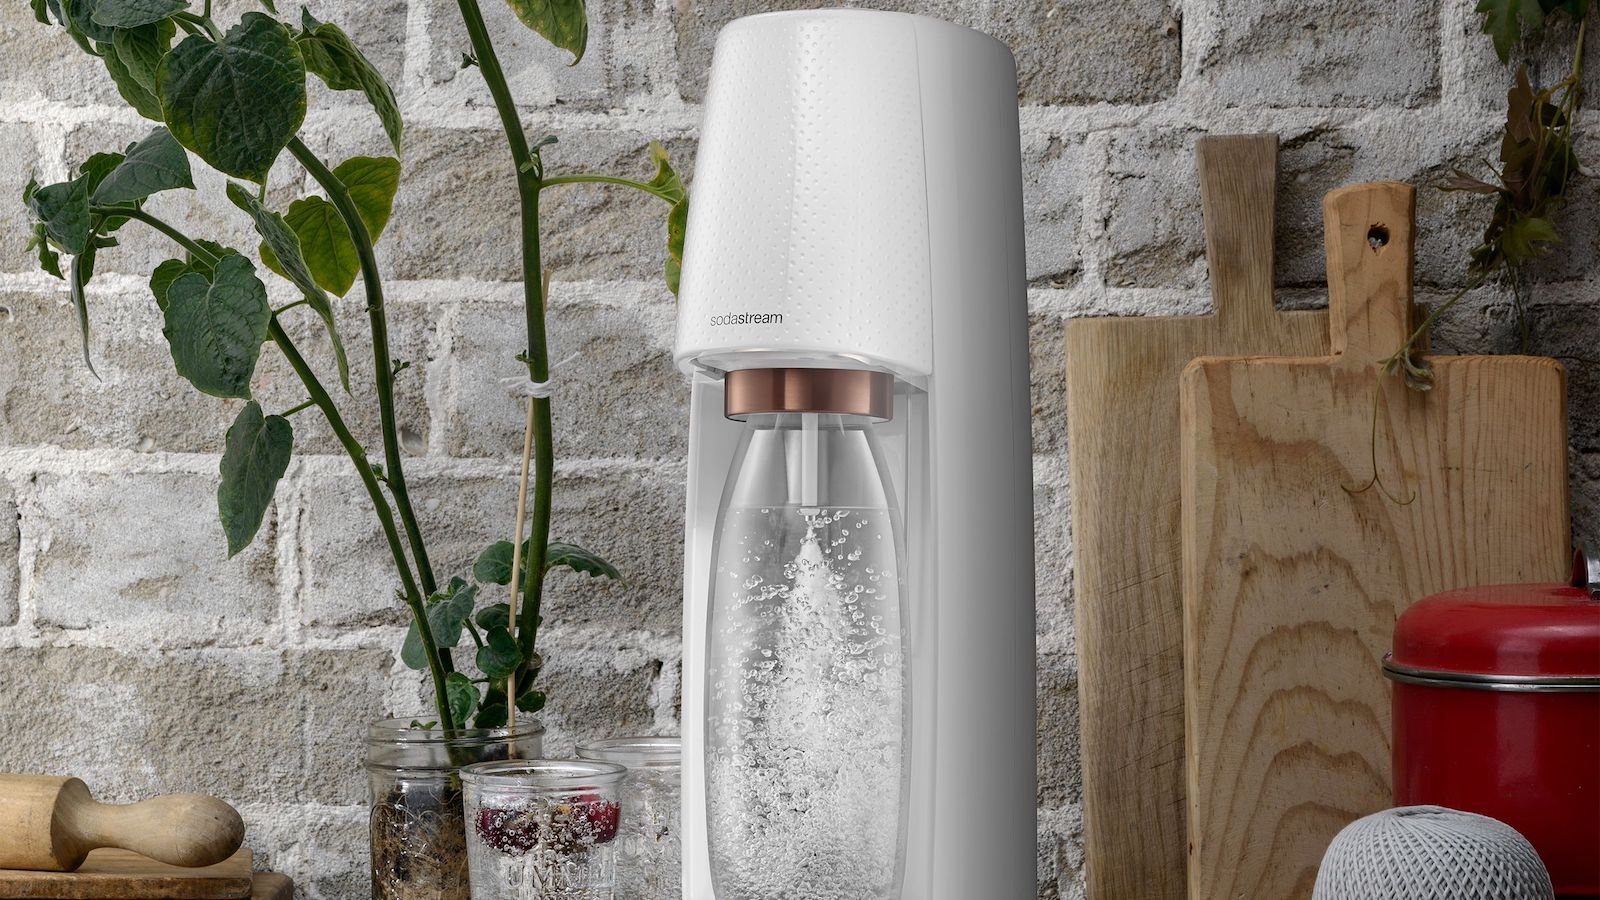 SodaStream Fizzi classic sparkling water maker features a compact, cordless design